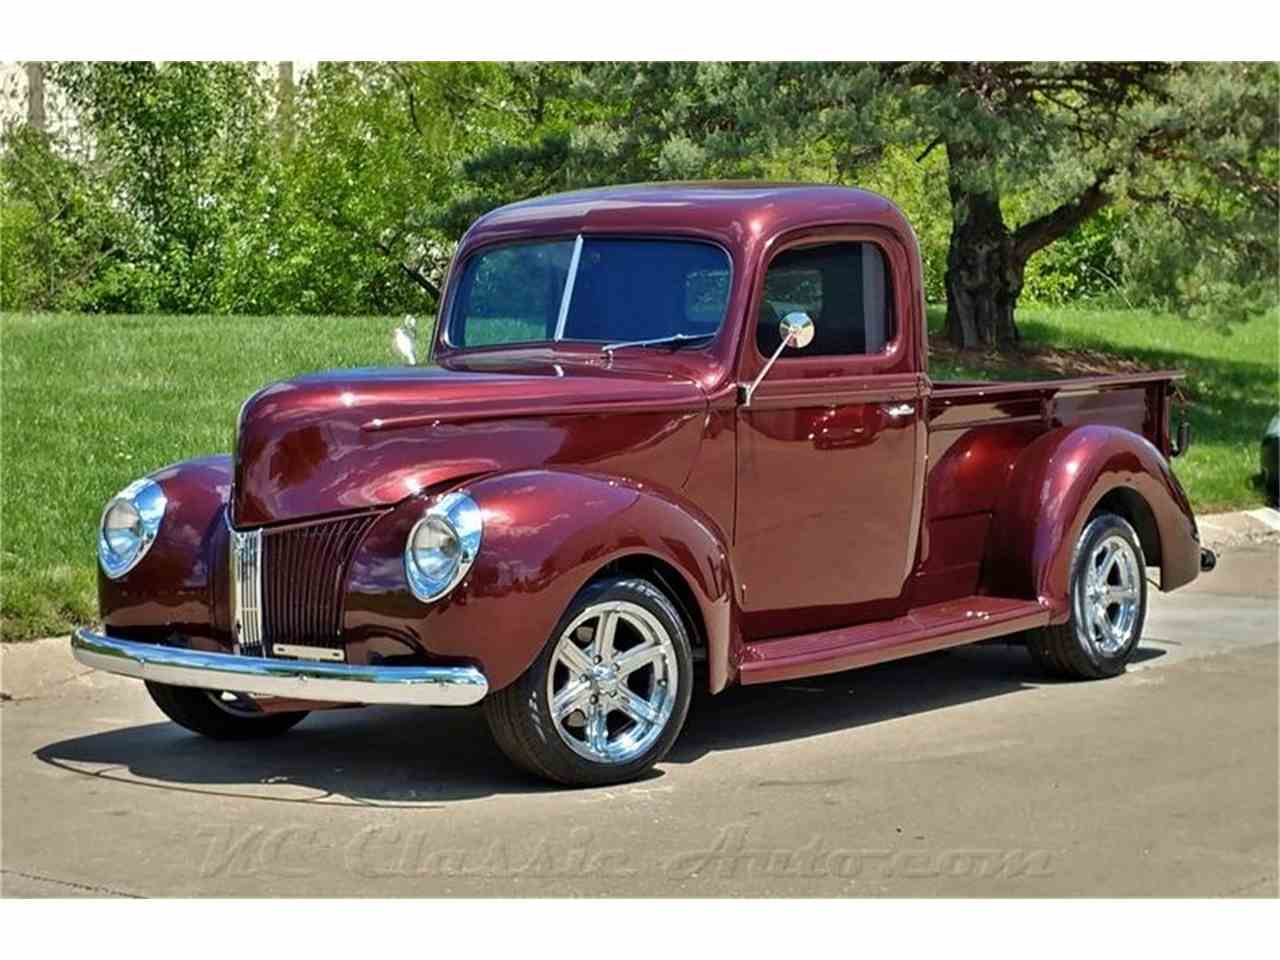 Ford Pickup: For Sale 1940 Ford Pickup